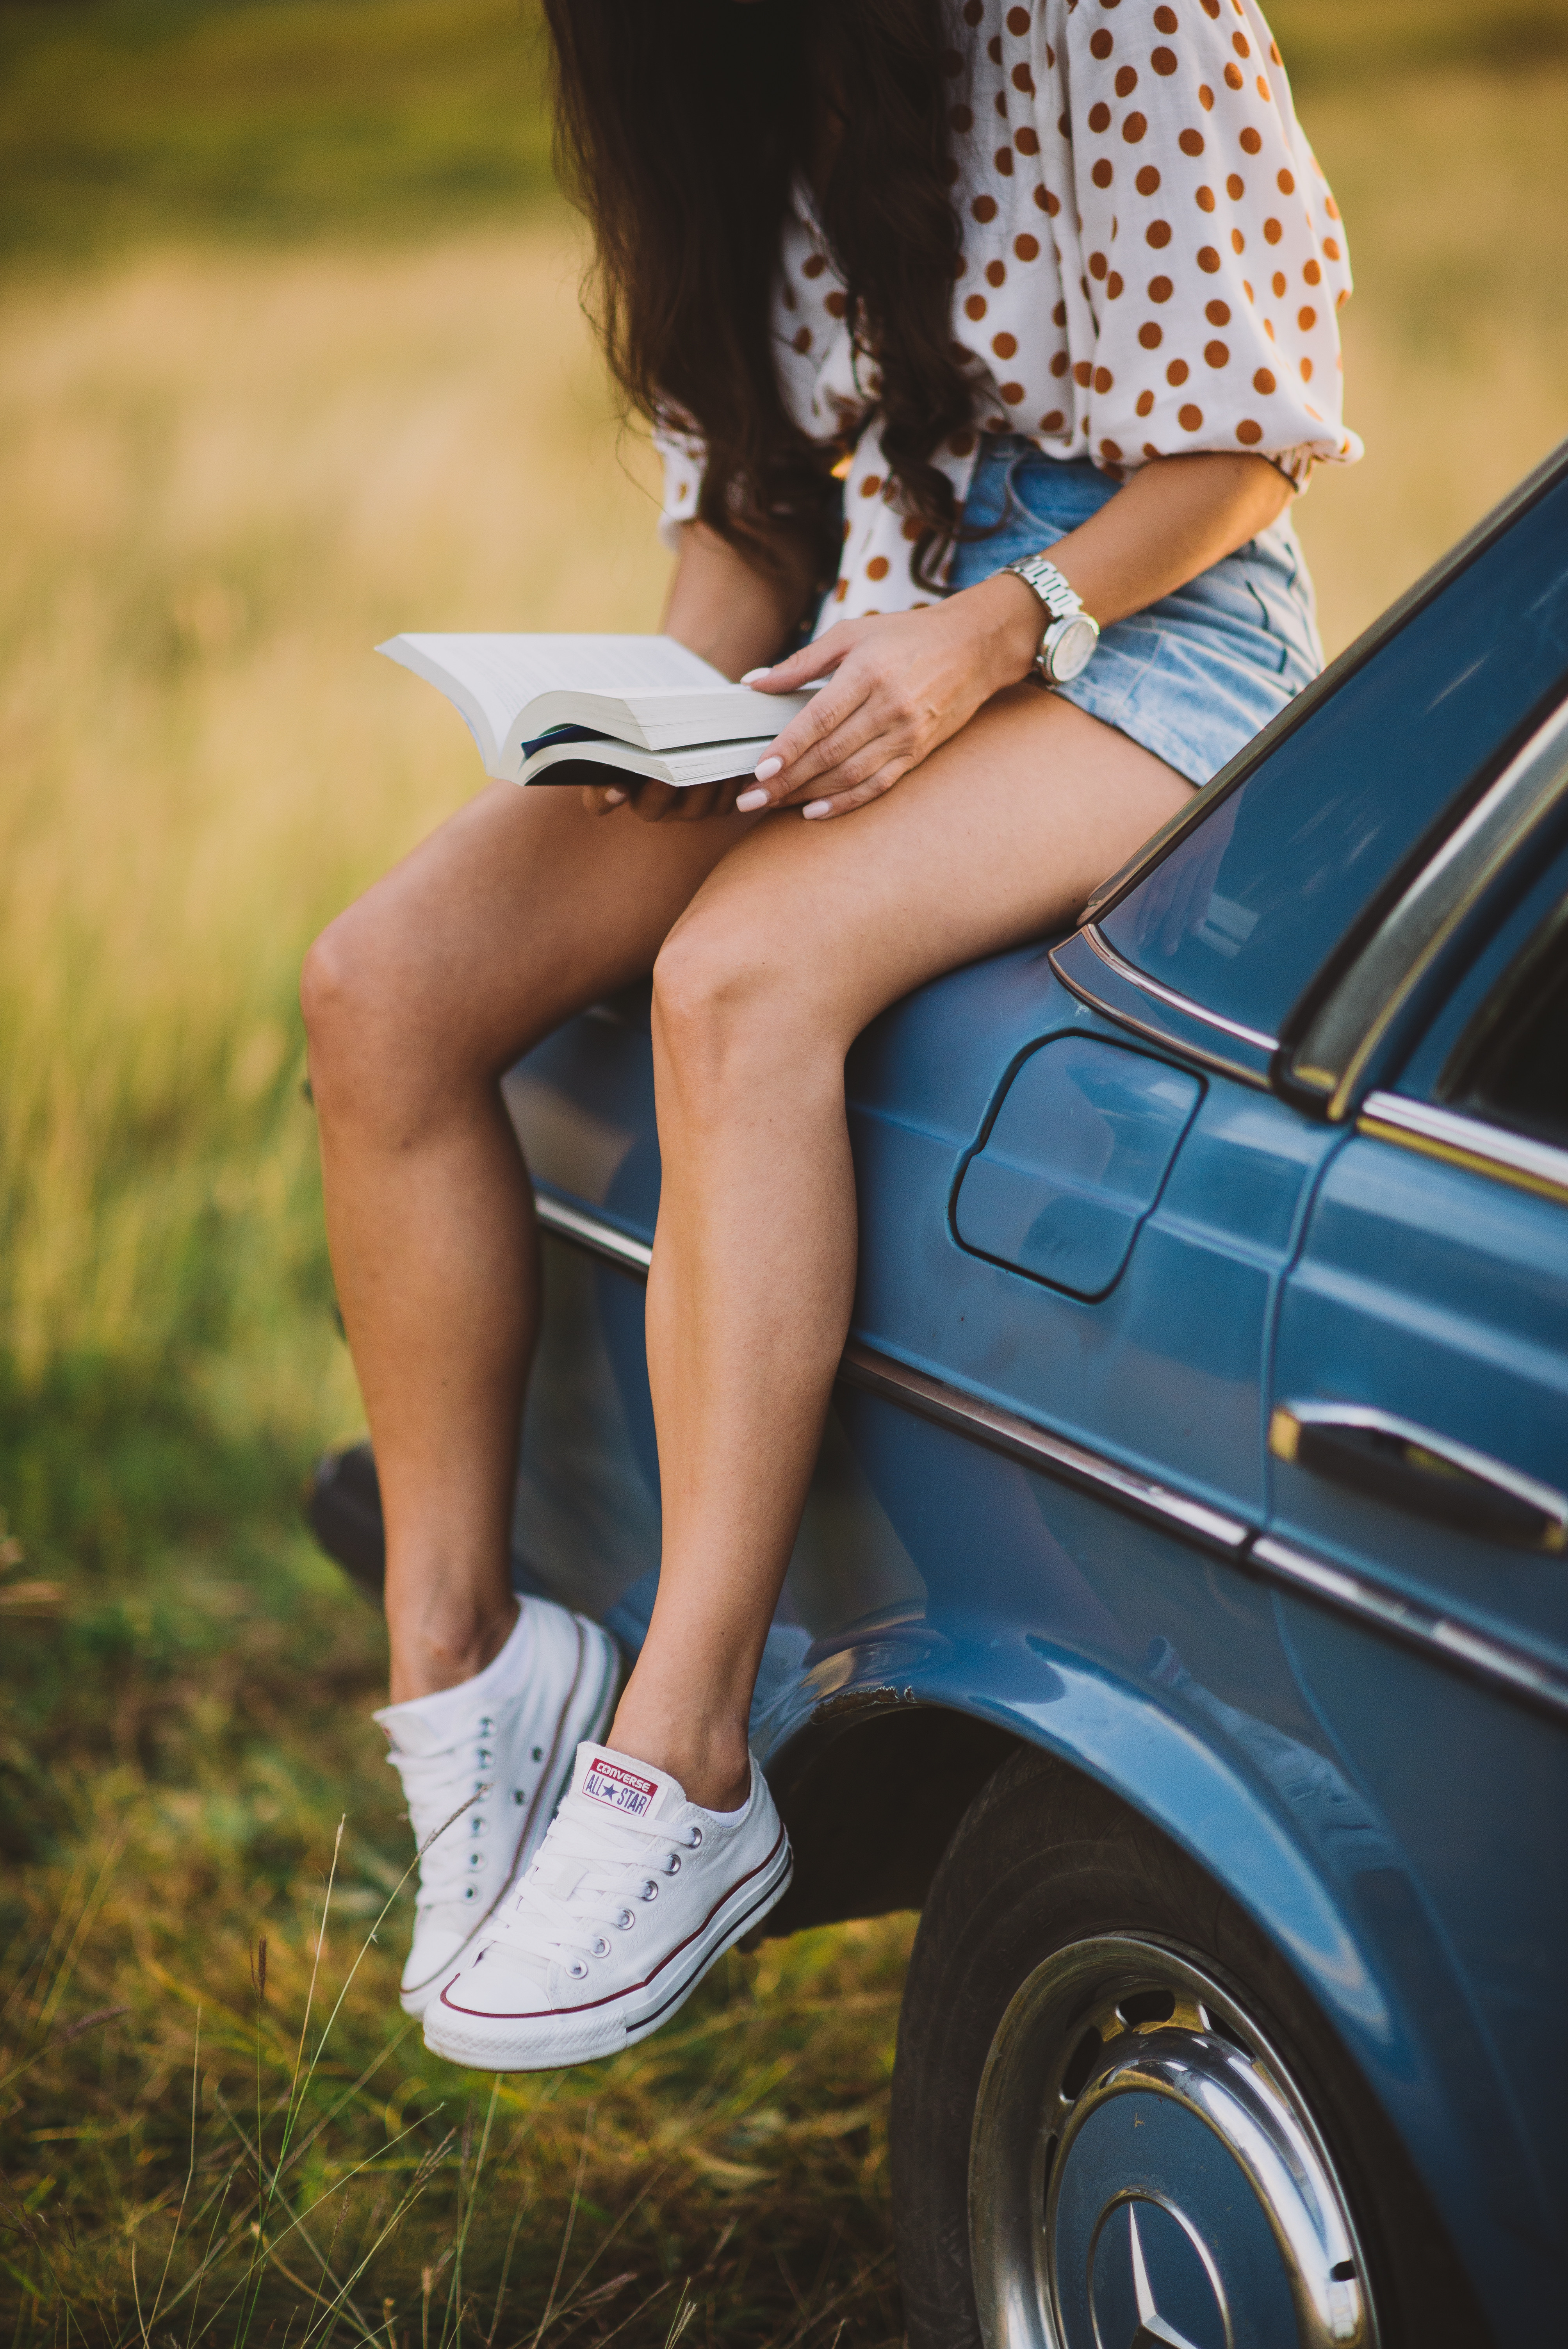 girl, miscellanea, miscellaneous, sneakers, car, machine, book, shoes, reading lock screen backgrounds